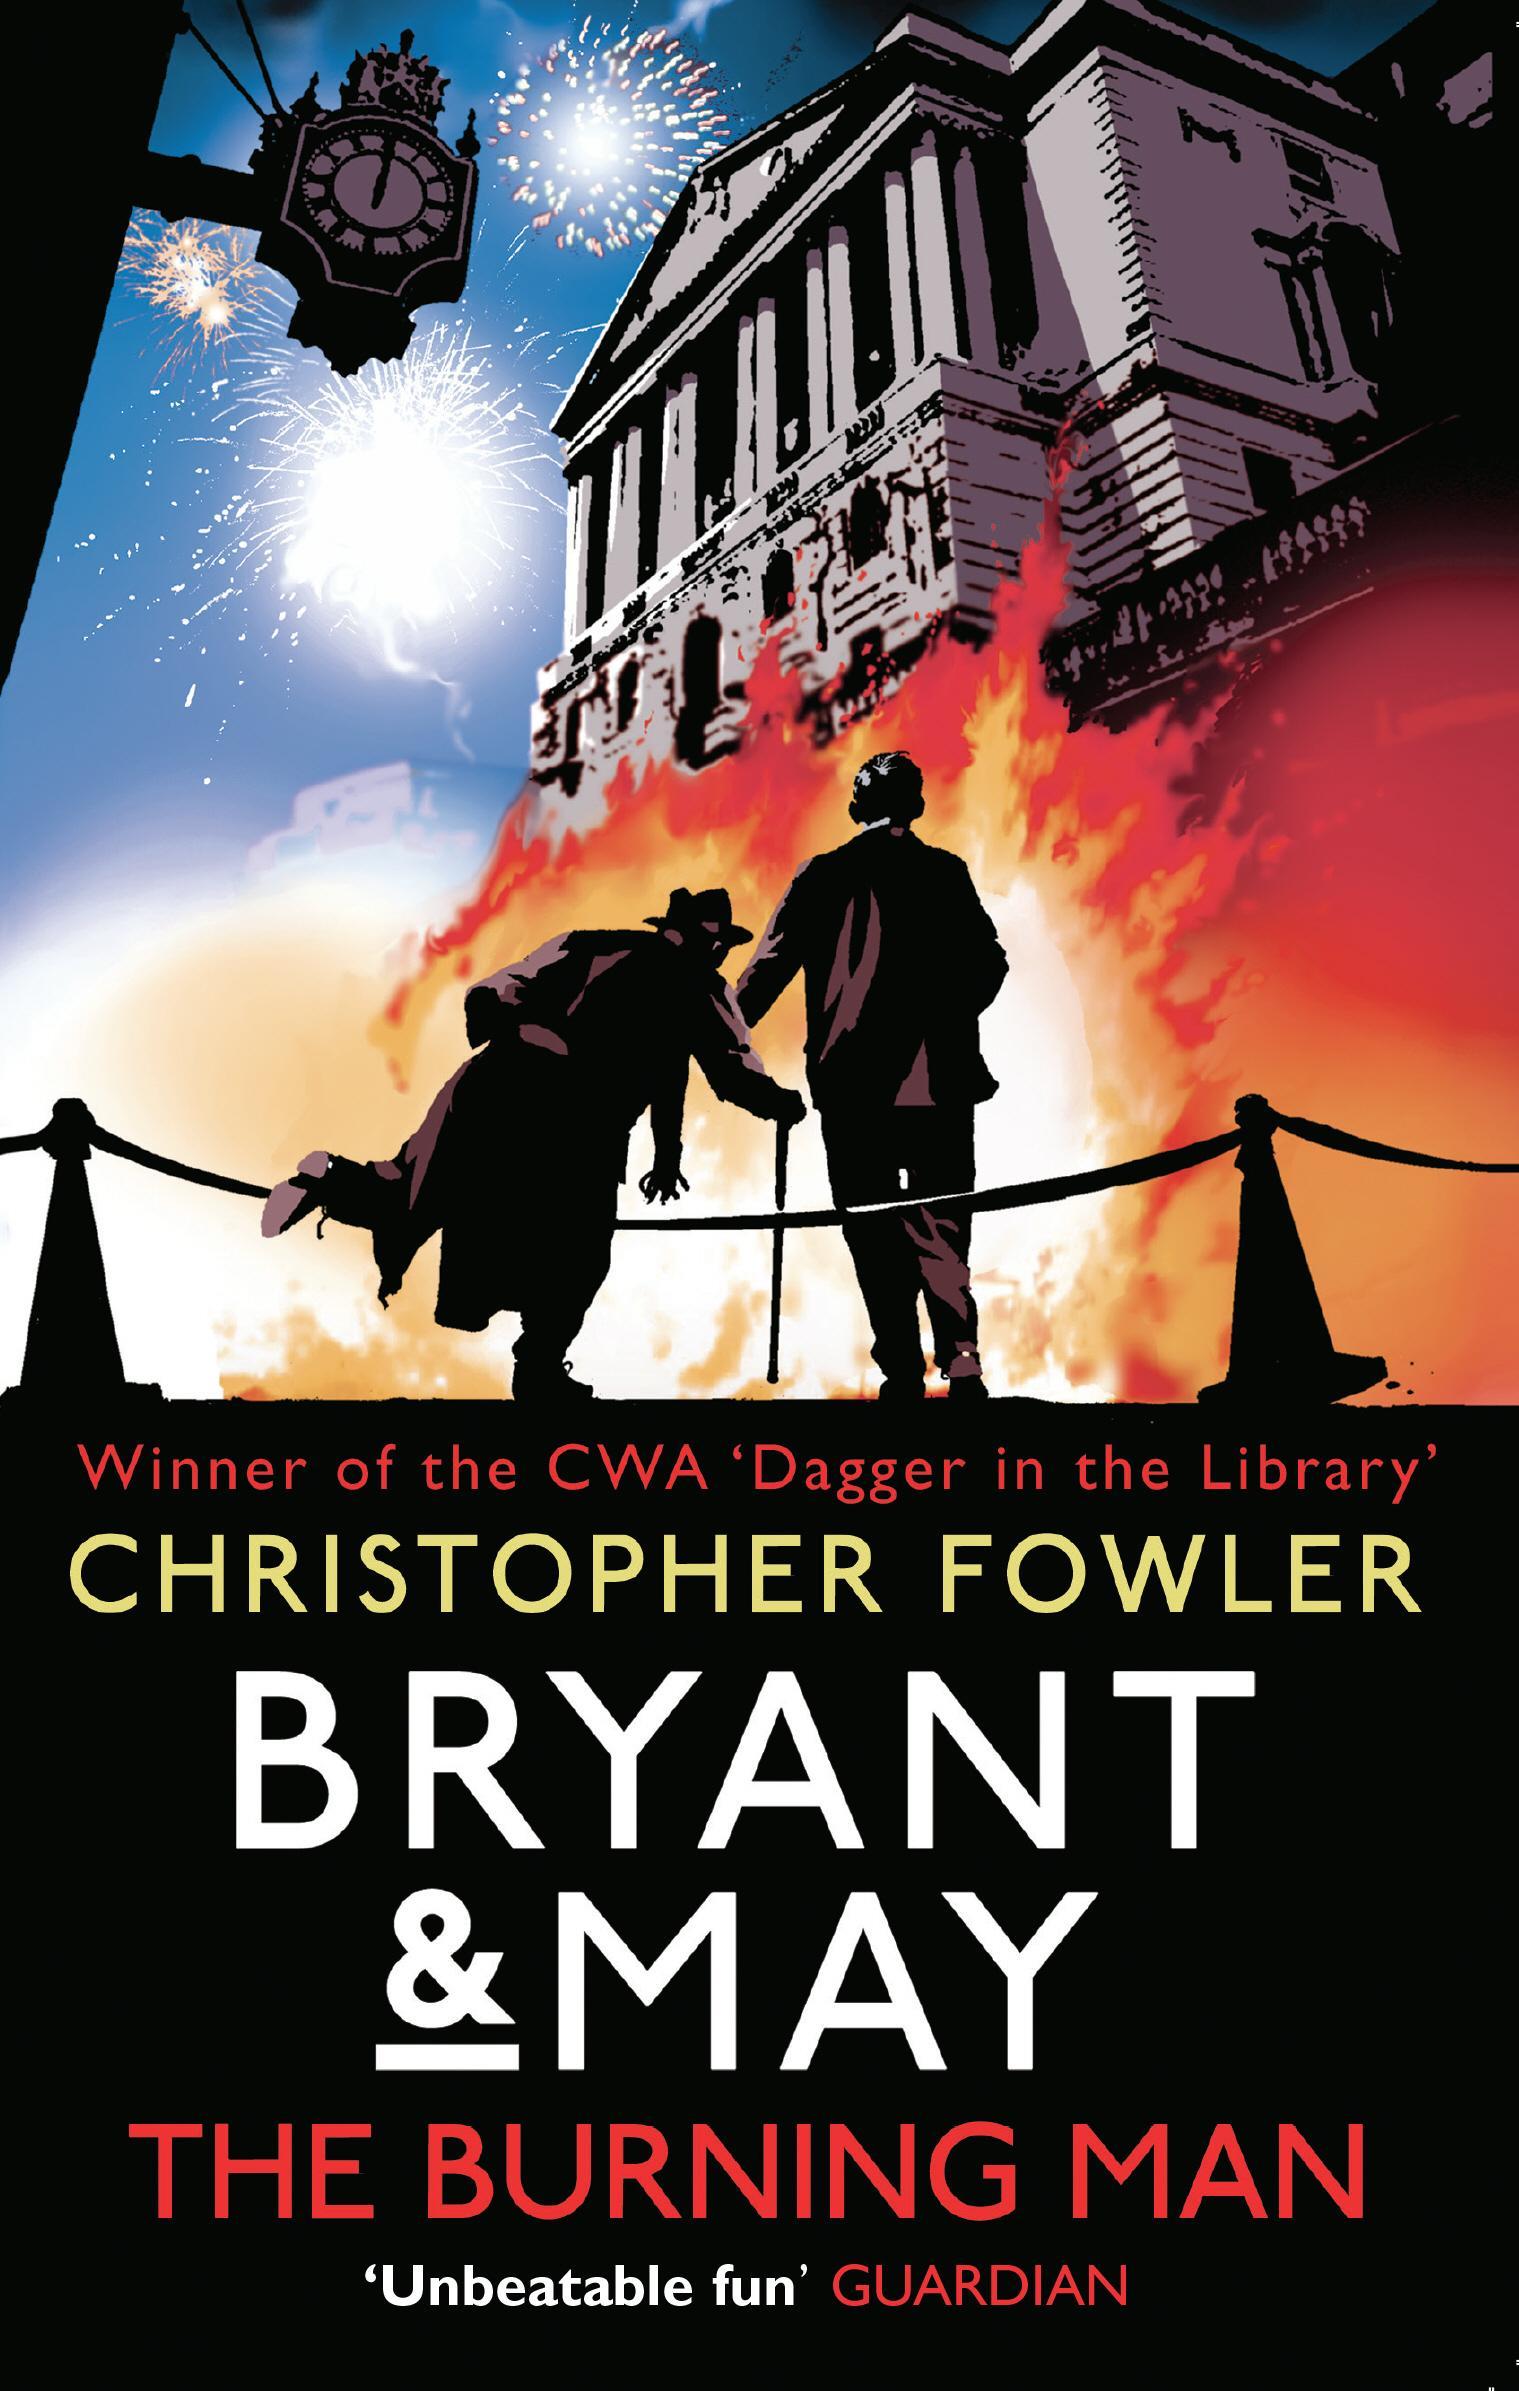 Bryant & May - The Burning Man - Christopher Fowler